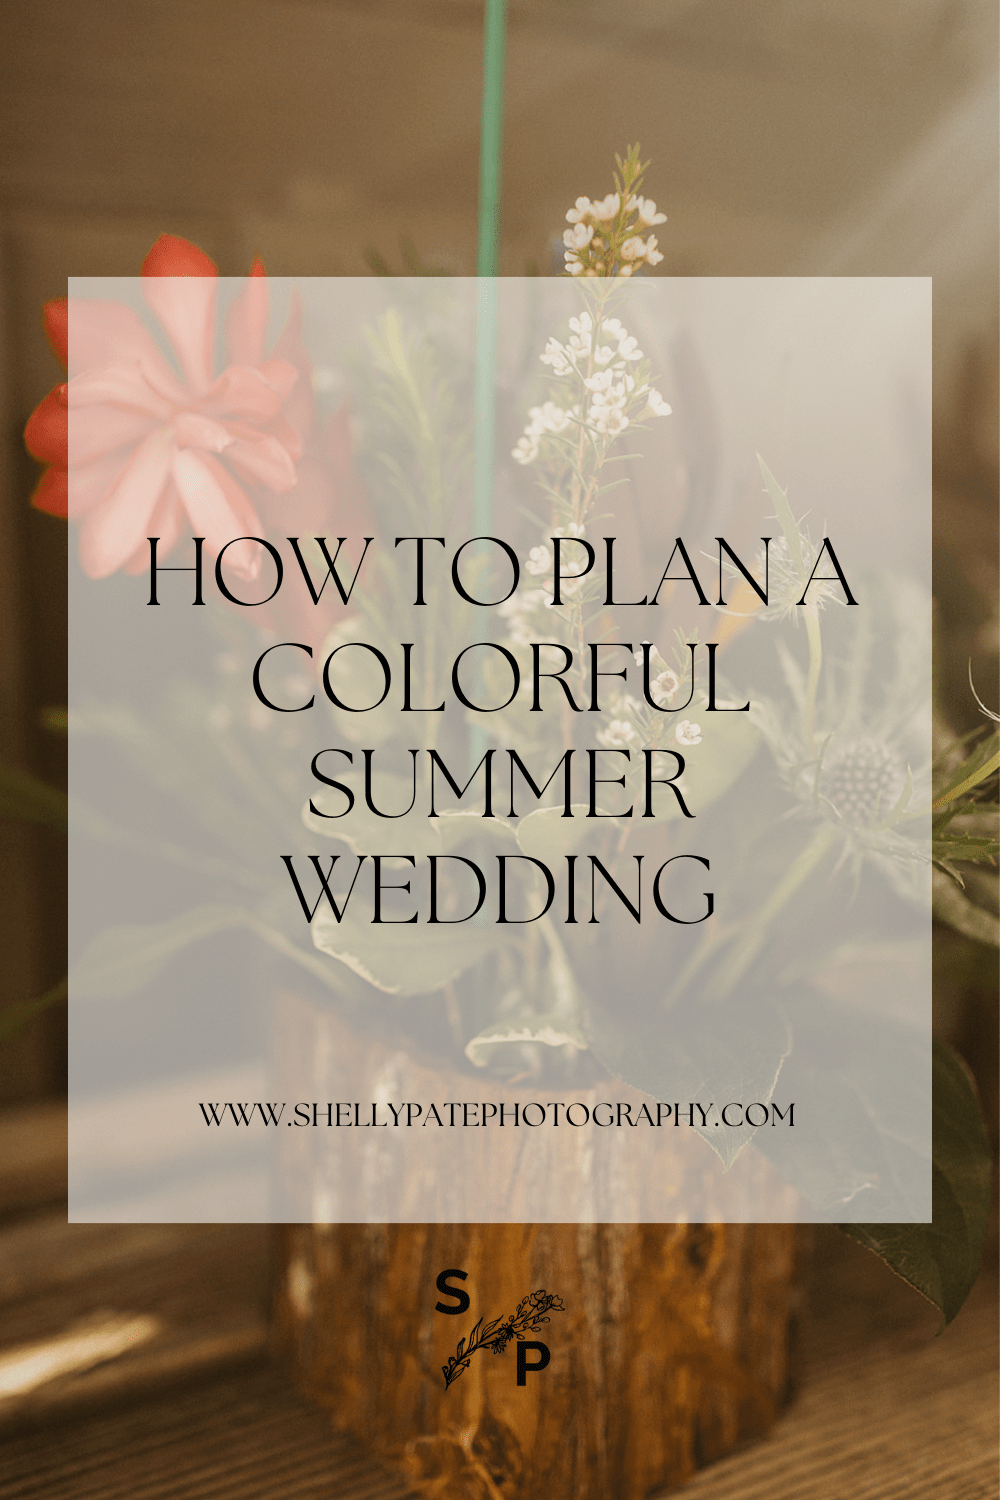 How to plan a colorful summer wedding tips